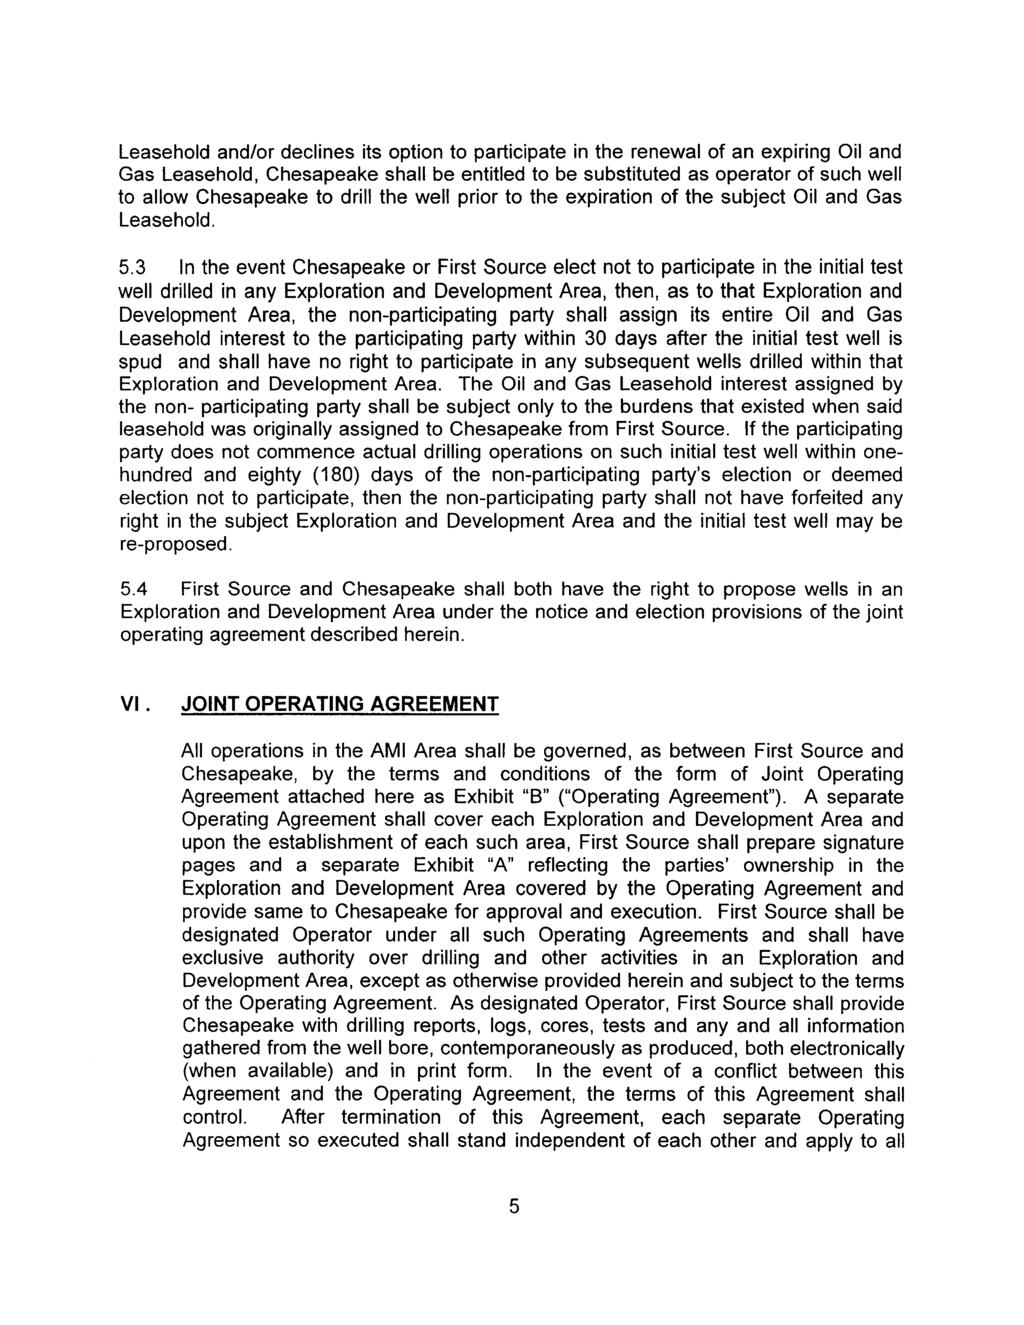 Case 4:12-cv-02922 Document 7-5 Filed in TXSD on 10/24/12 Page 5 of 8 Leasehold and/or declines its option to participate in the renewal of an expiring Oil and Gas Leasehold, Chesapeake shall be